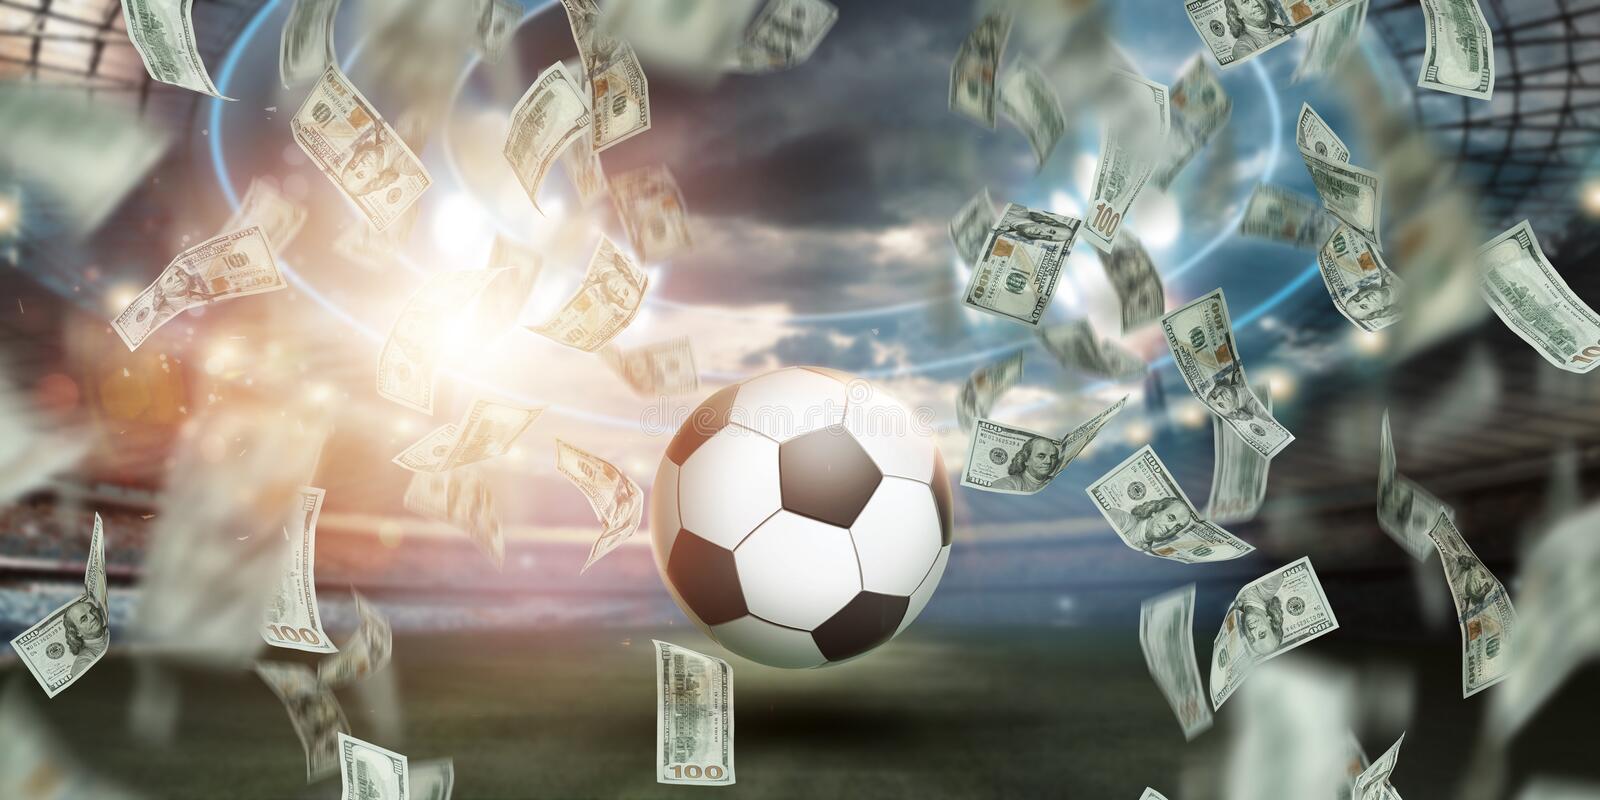 Why Do You Need A Professional Betting Site To Land Your Big Pay Day? post thumbnail image